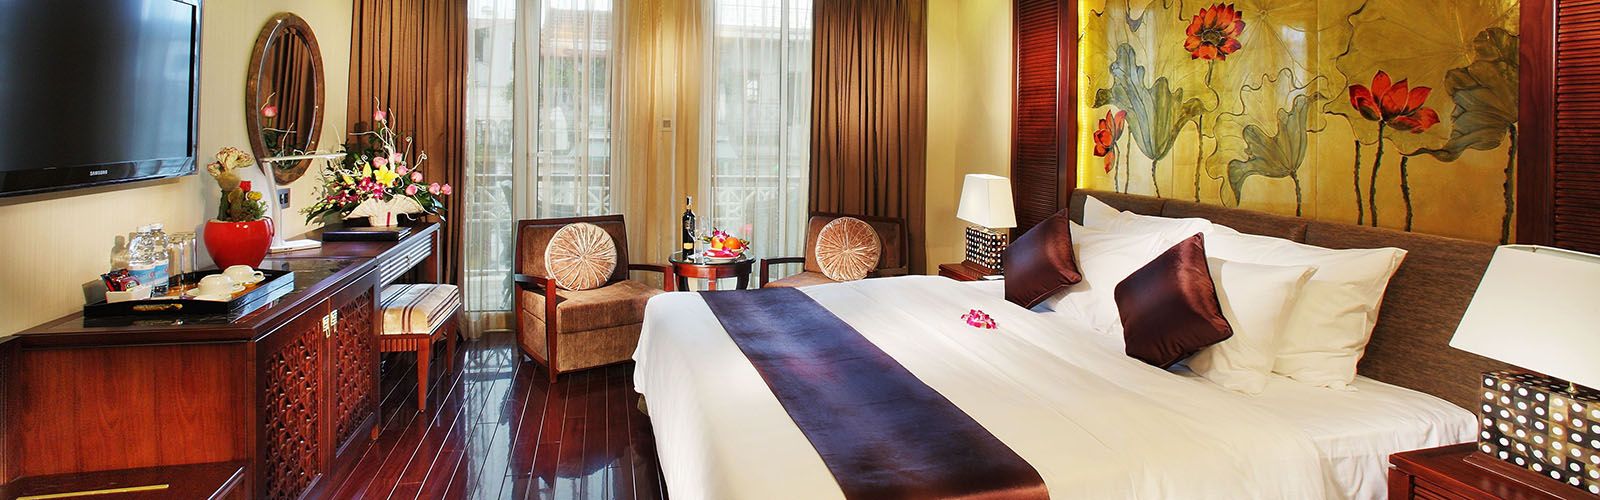 Two Nights At Luxury Hotel In Hanoi | Blogs | Asianventure Tours